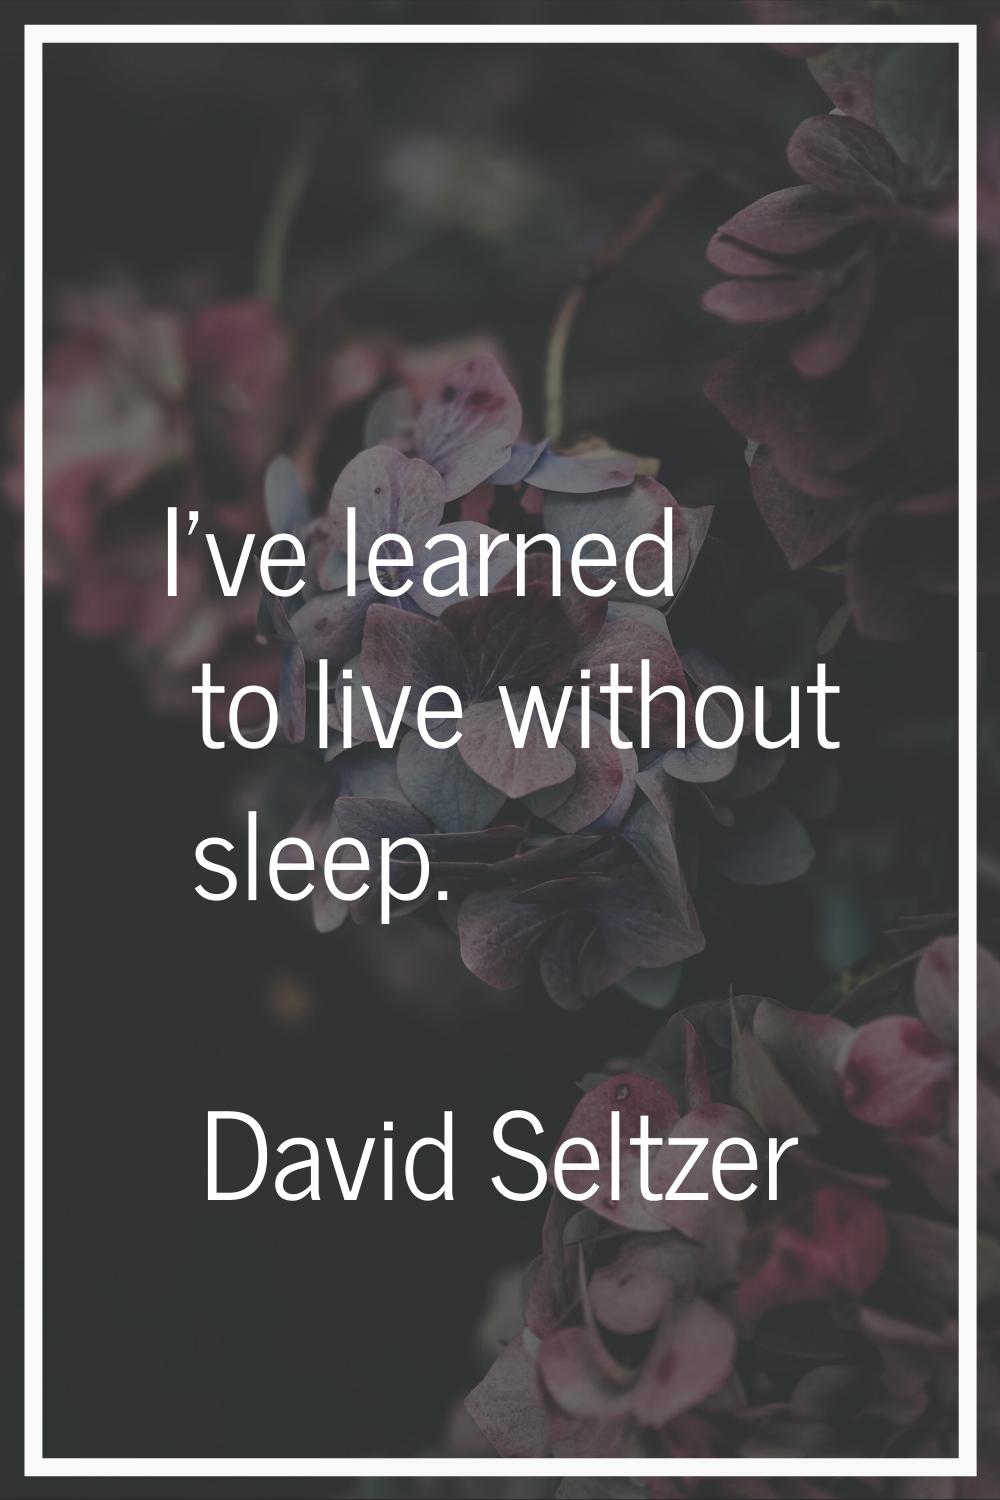 I've learned to live without sleep.